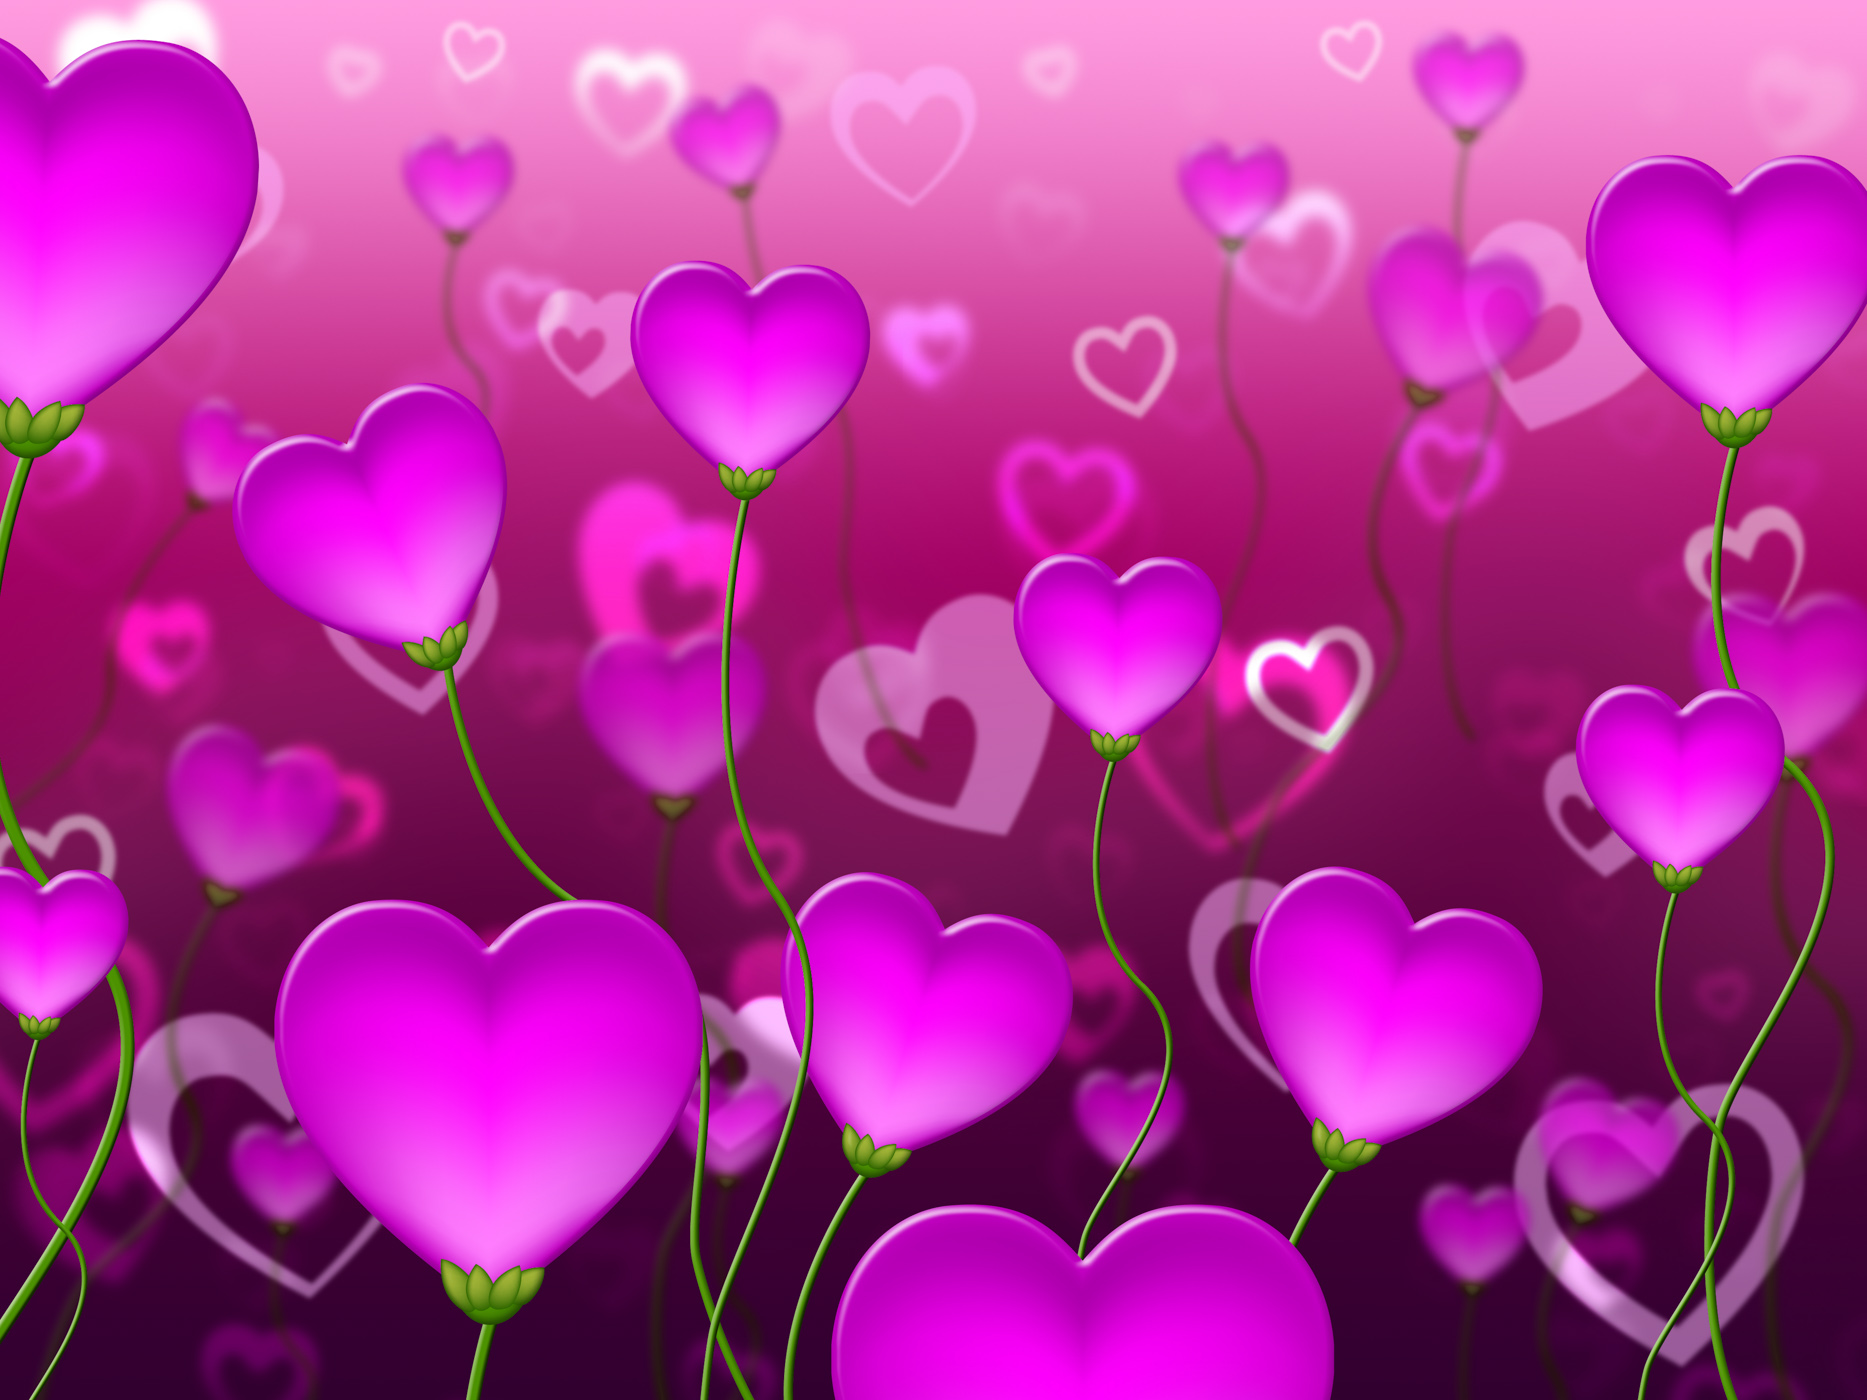 Mauve hearts background represents valentine day and backgrounds photo